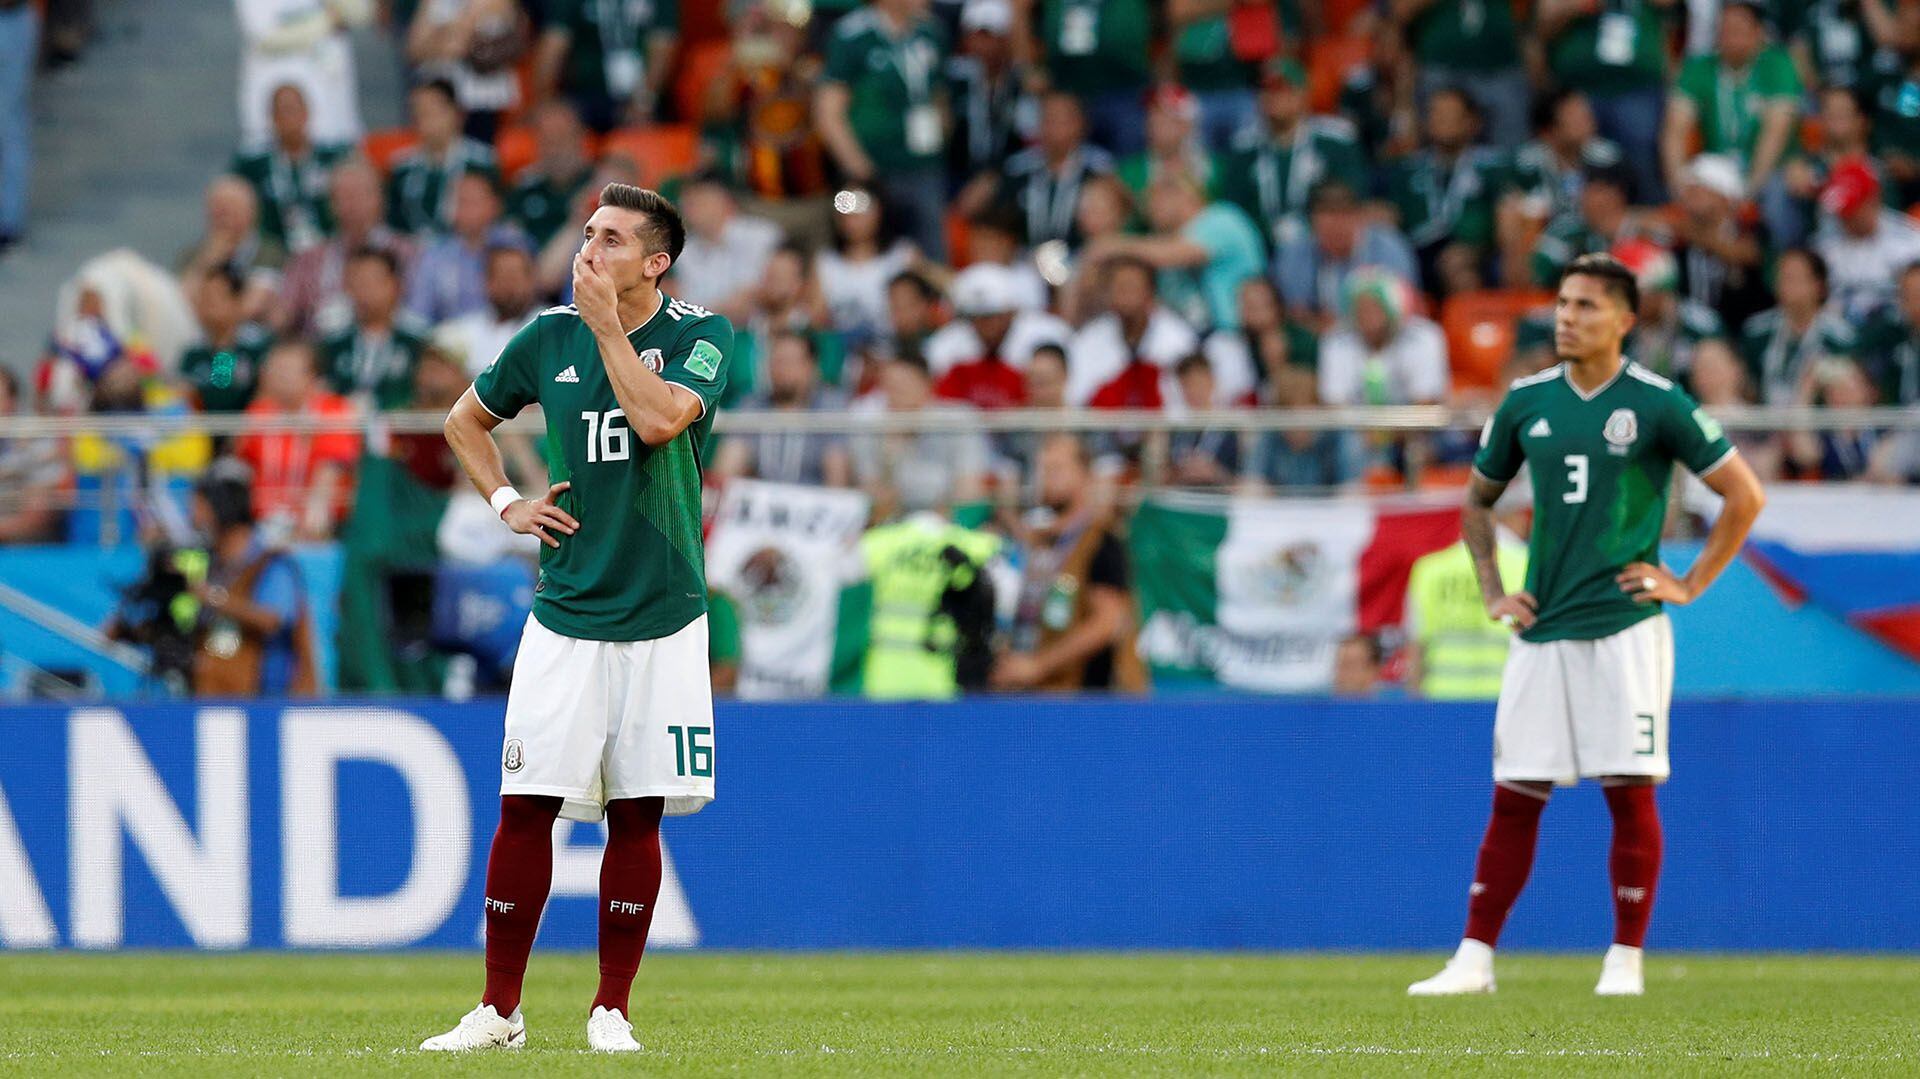 Soccer Football - World Cup - Group F - Mexico vs Sweden - Ekaterinburg Arena, Yekaterinburg, Russia - June 27, 2018   Mexico's Hector Herrera reacts after Sweden's Ludwig Augustinsson scored their first goal     REUTERS/Darren Staples